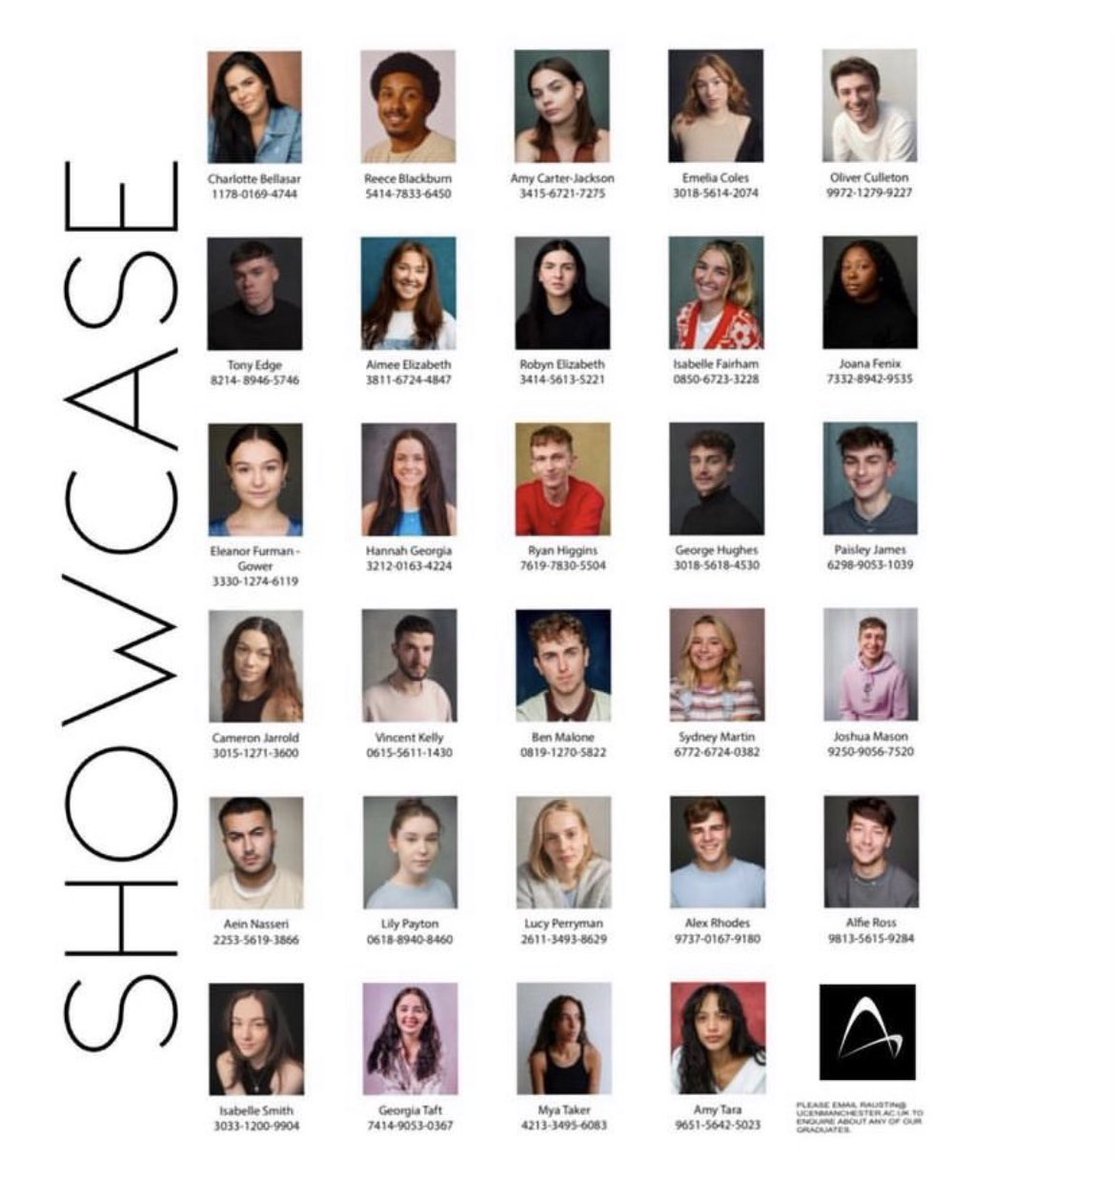 Our Industry Showcase will be taking place on the 23rd March at 3pm, anyone wanting to view this through the live stream, please DM me! Exciting!! ✨